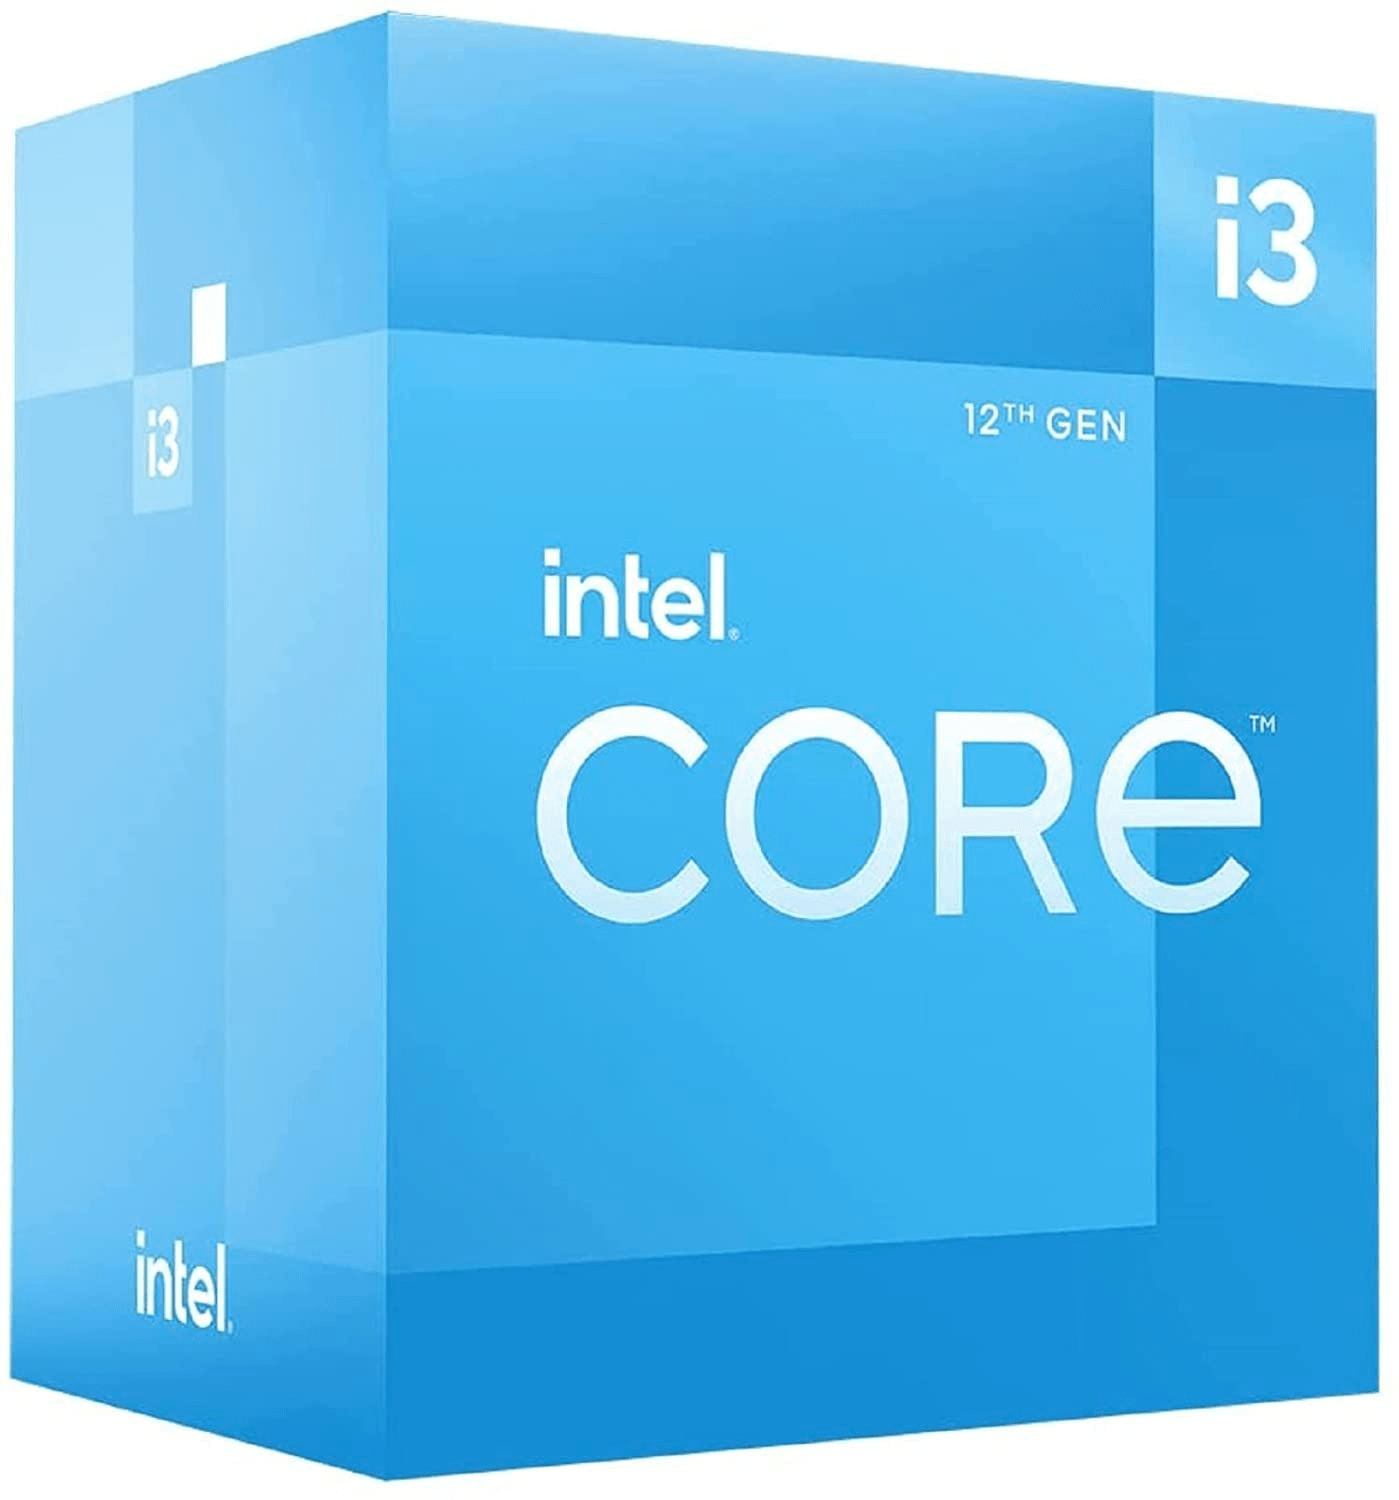 Intel Core i3-112100 | Best CPU under 15000 for gaming